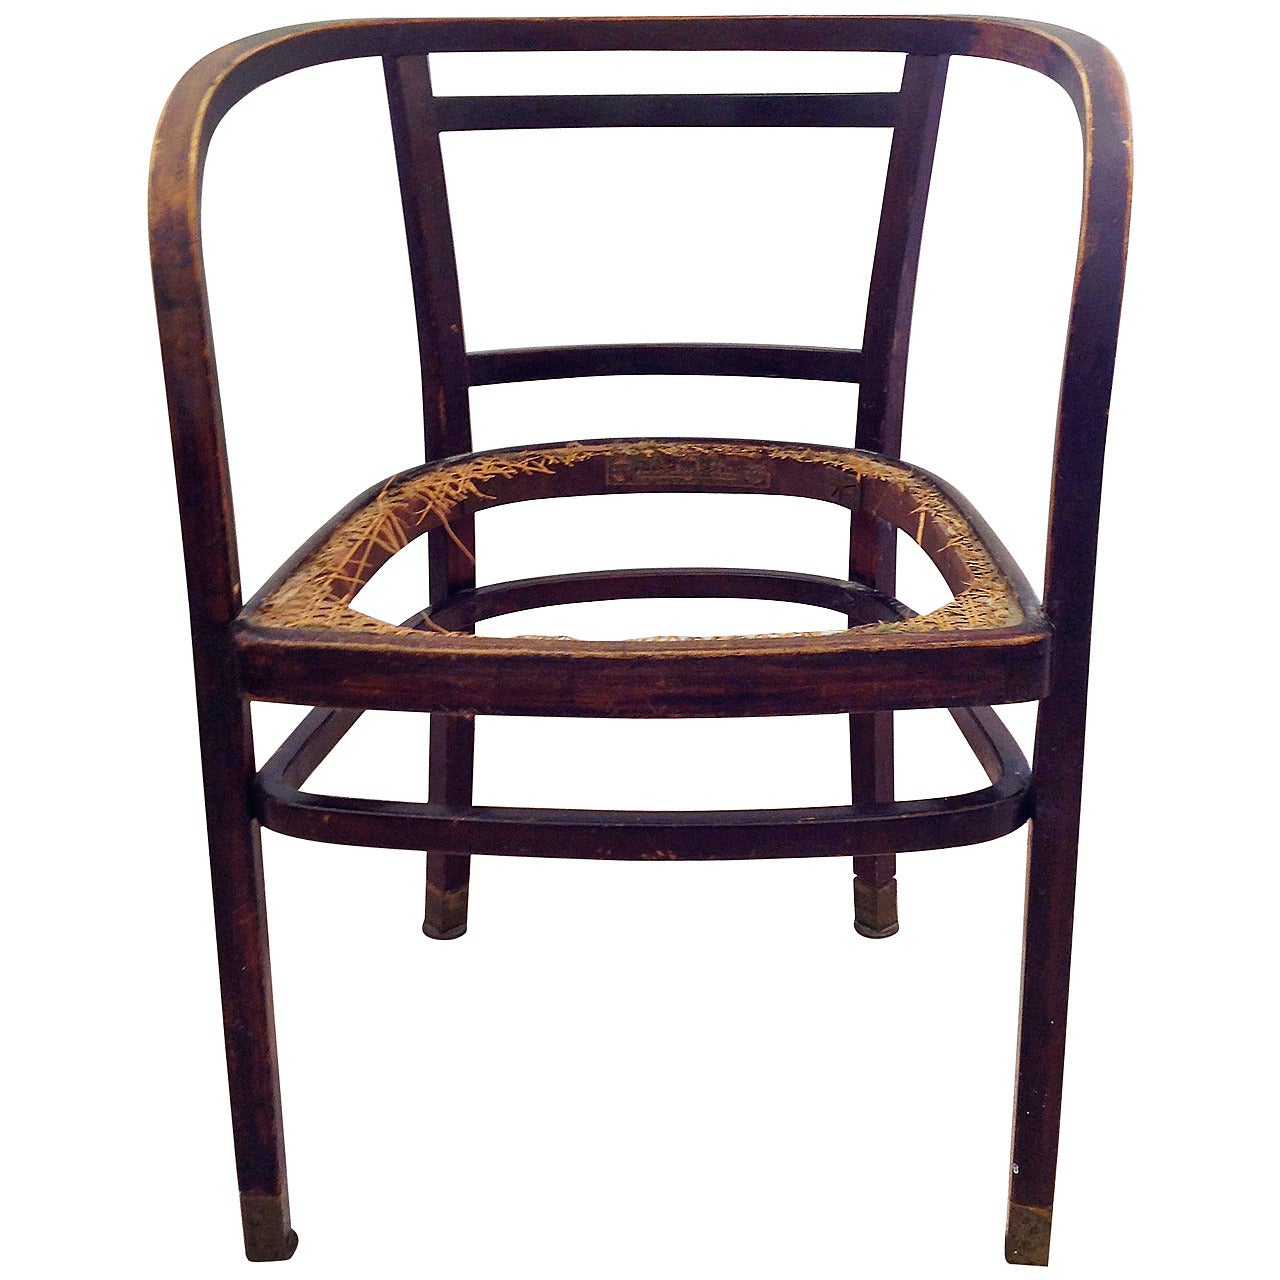 Armchair by Otto Wagner for the Telegraph Office "Die Zeit"